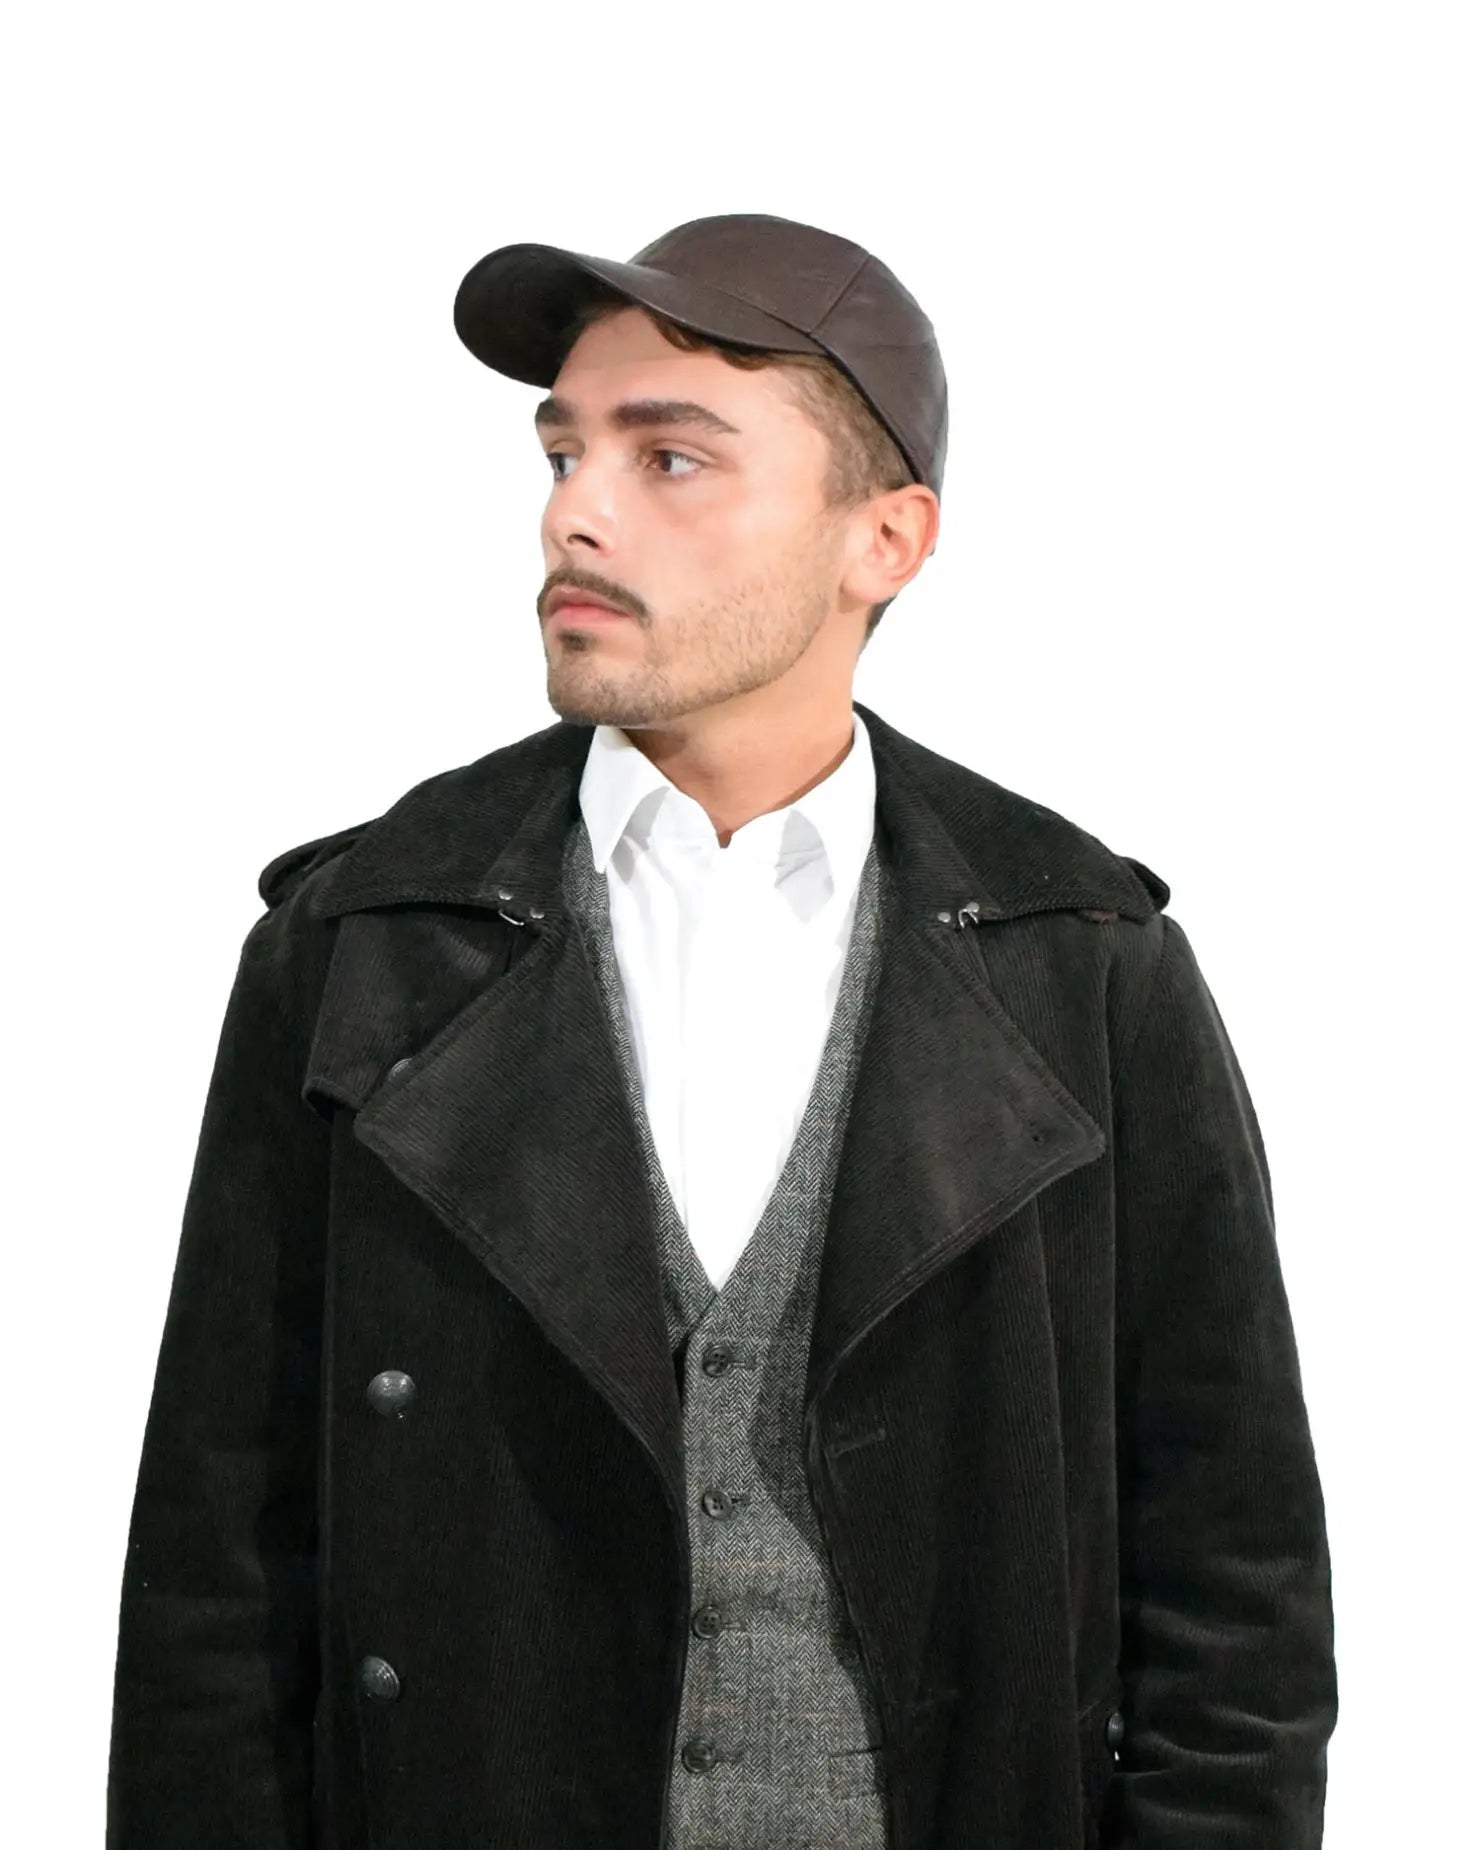 Authentic lambskin leather baseball cap for men - black coat and hat outfit